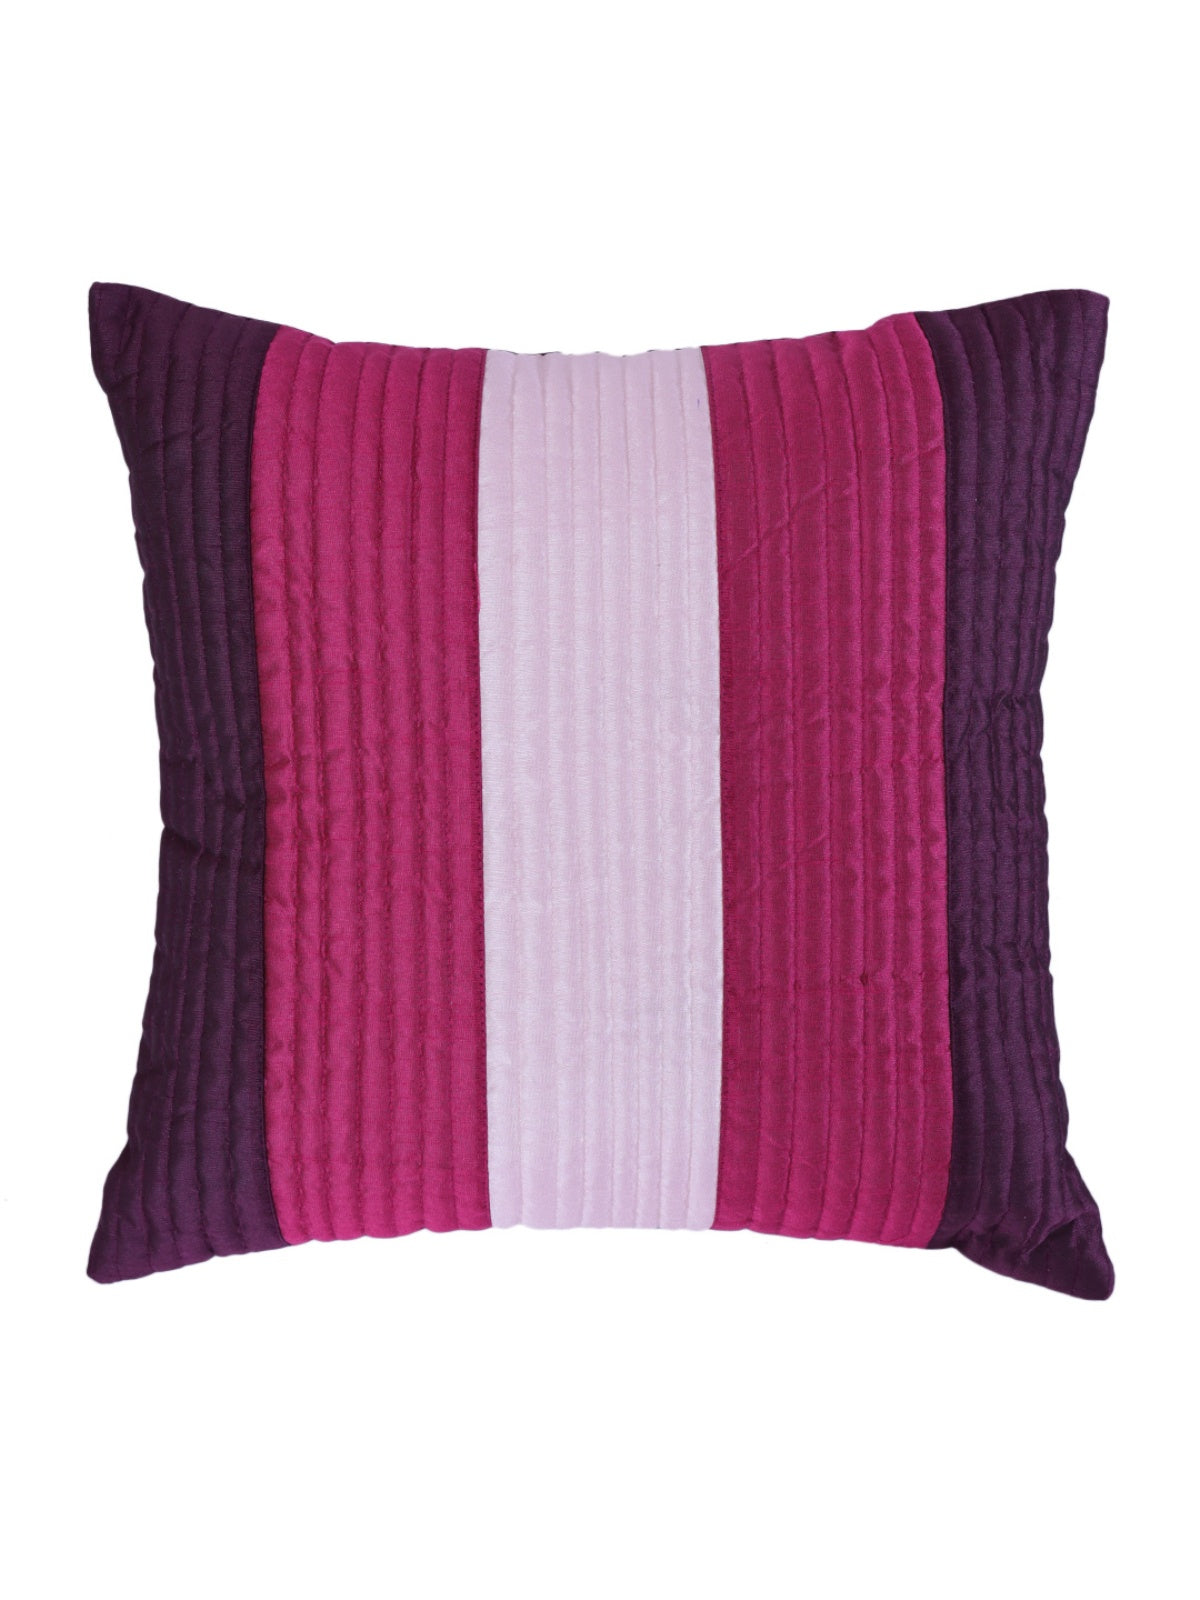 Striped Printed Polyester Cushion Cover Set of 5 - Pink & Purple